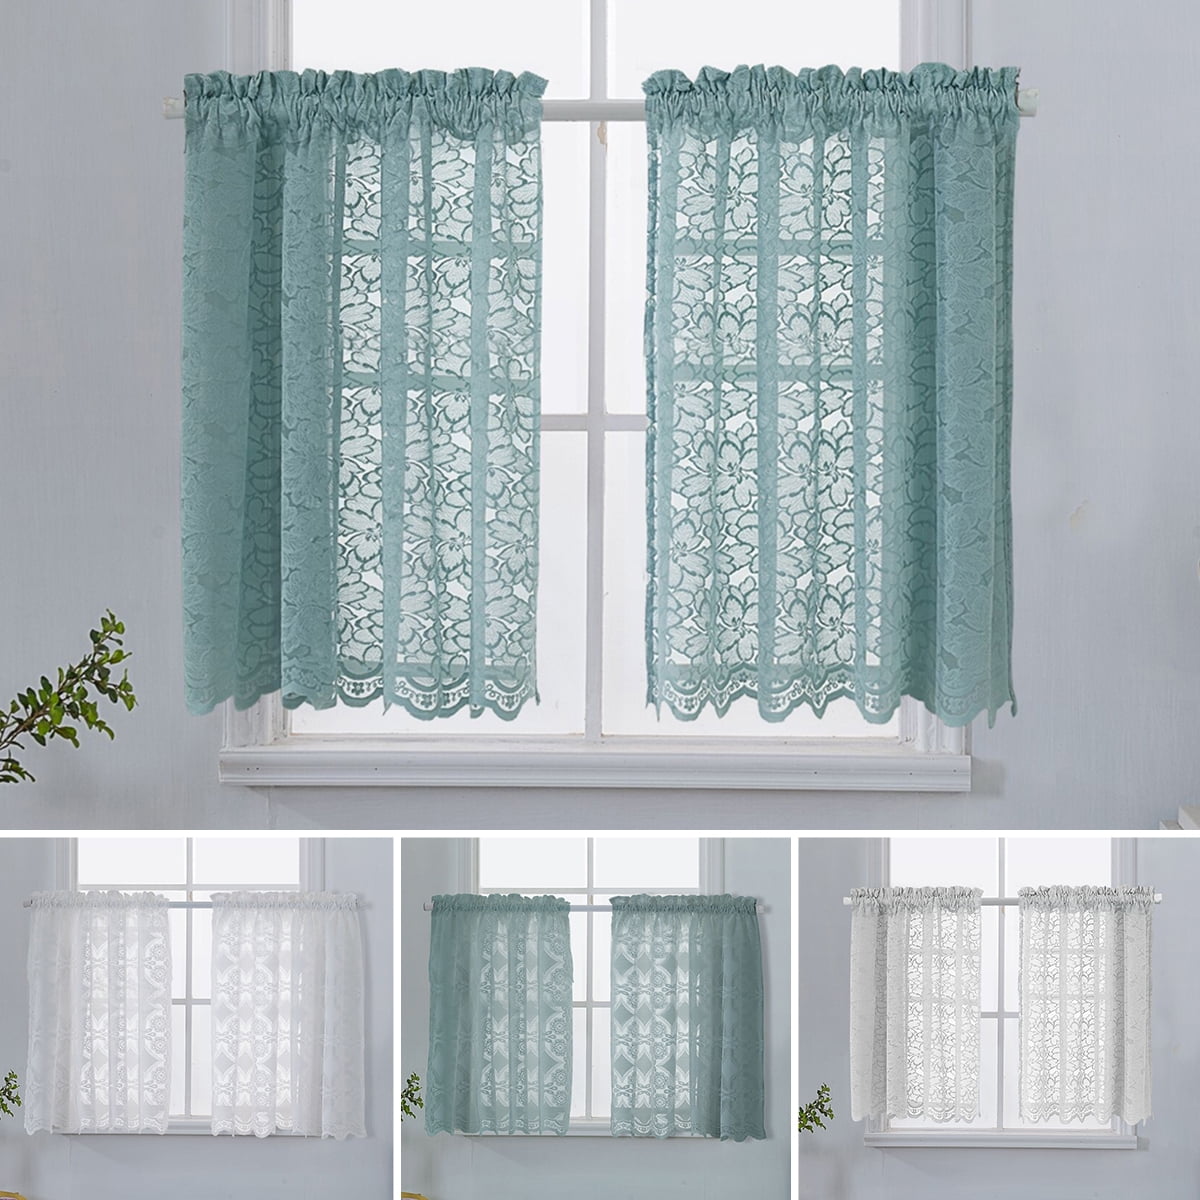 Floral Slot Top Lace Short Curtain Kitchen Coffee Cafe Window Tulle Net Panel 